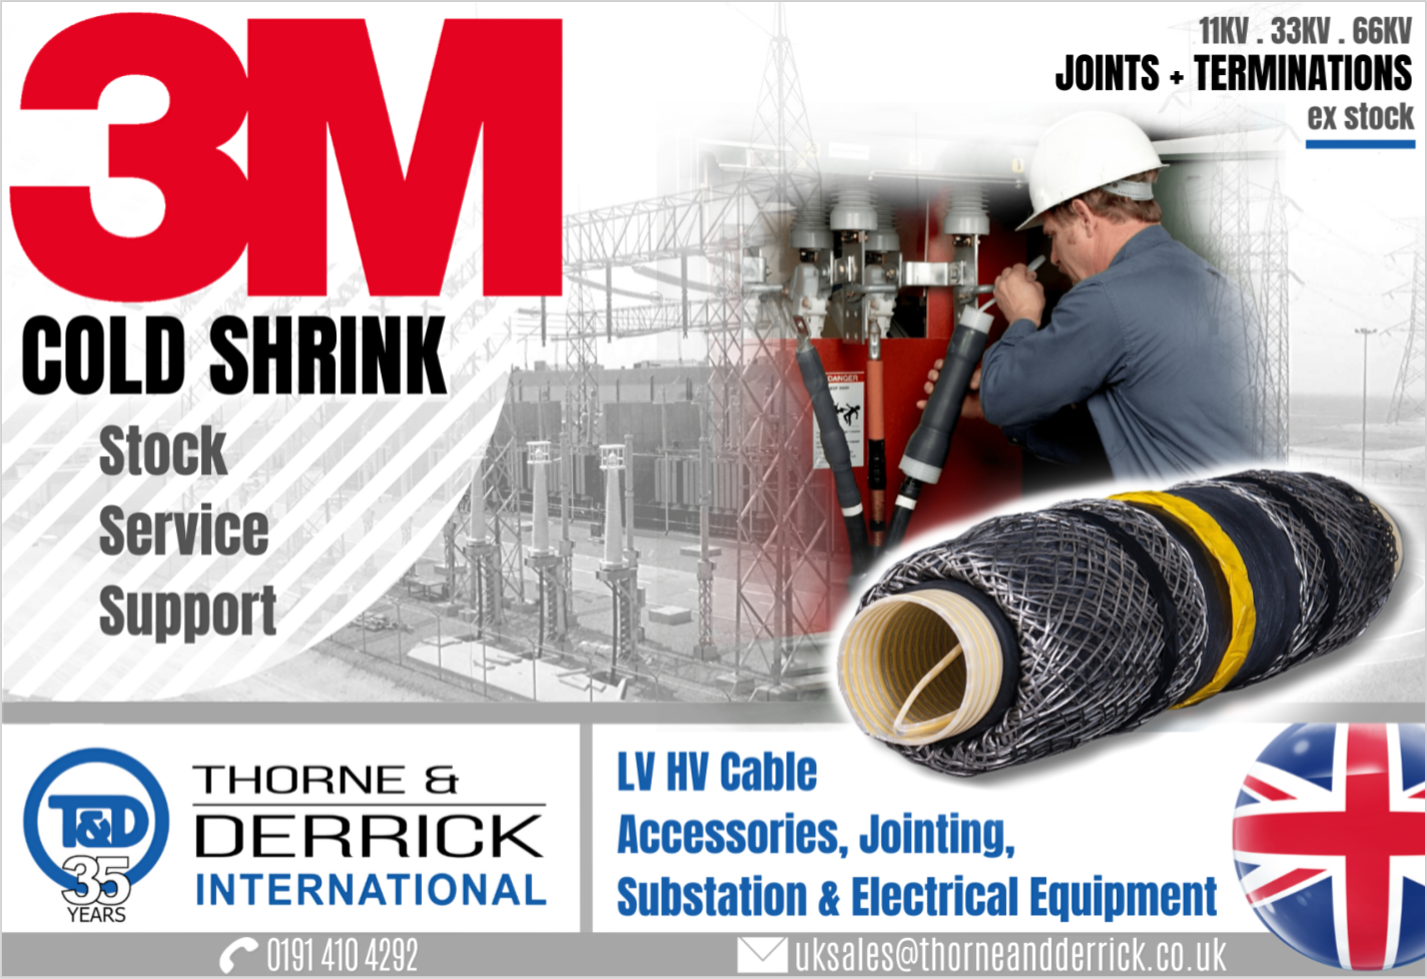 Thorne & Derrick provide competitive prices and fast delivery from stock for the complete range of 3M Scotchcast and Cold Shrink cable joints, terminations, resins and Scotch electrical tapes – we stock high voltage cable joints and terminations manufactured from 3M using Cold Shrink for 11kV/33kV and up to 66kV cables.